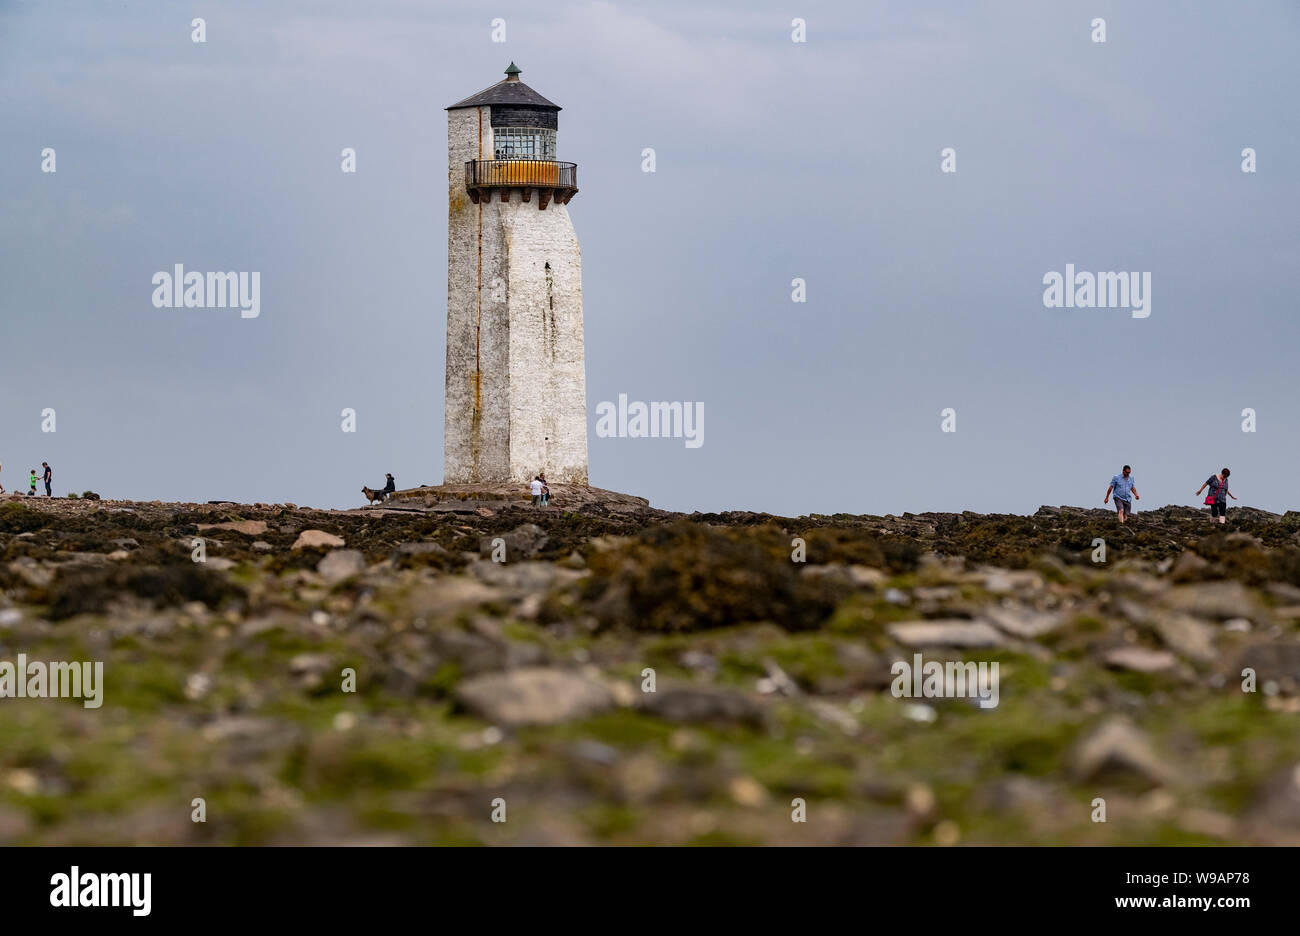 A view of the famous lighthouse at Southerness on the Solway Firth, Scotland.  The lighthouse is the second oldest in Scotland. Stock Photo